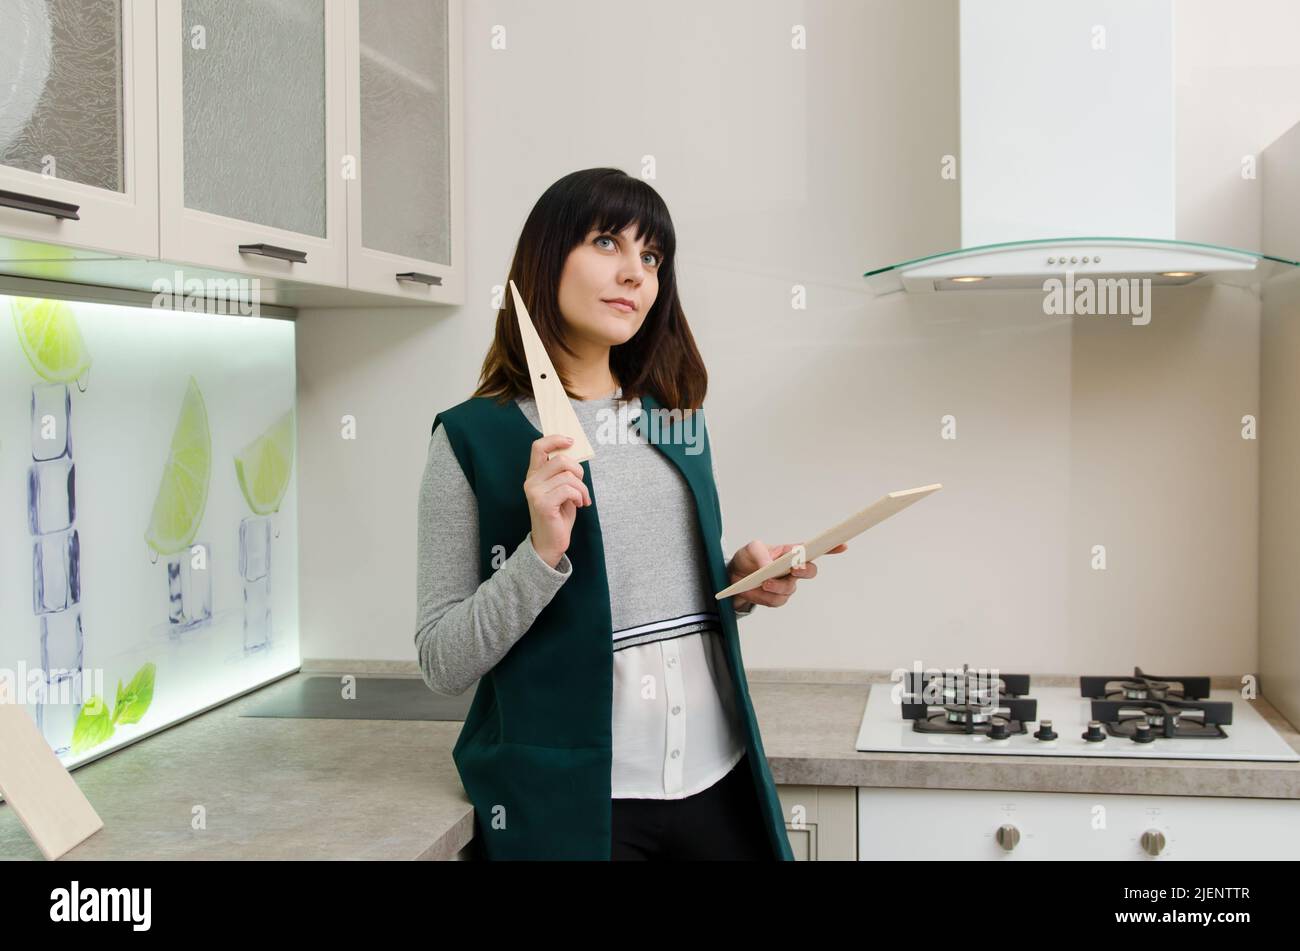 Young woman with a wooden plank next to a gas stove in the kitchen Stock Photo